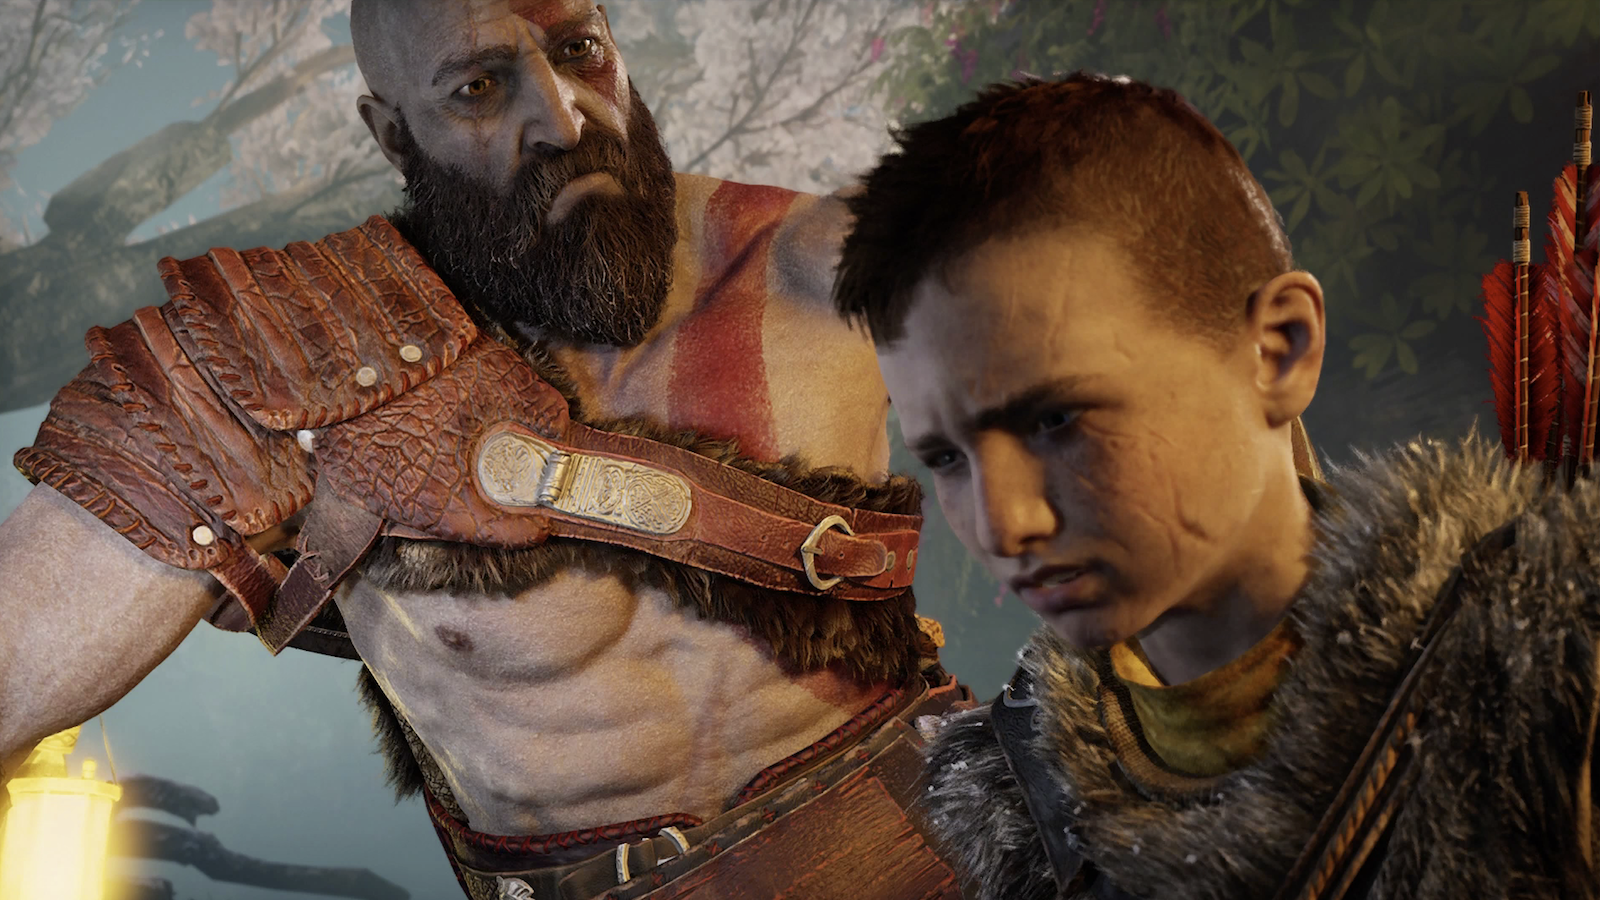 Clear Images of Thor Odinson : r/GodofWar